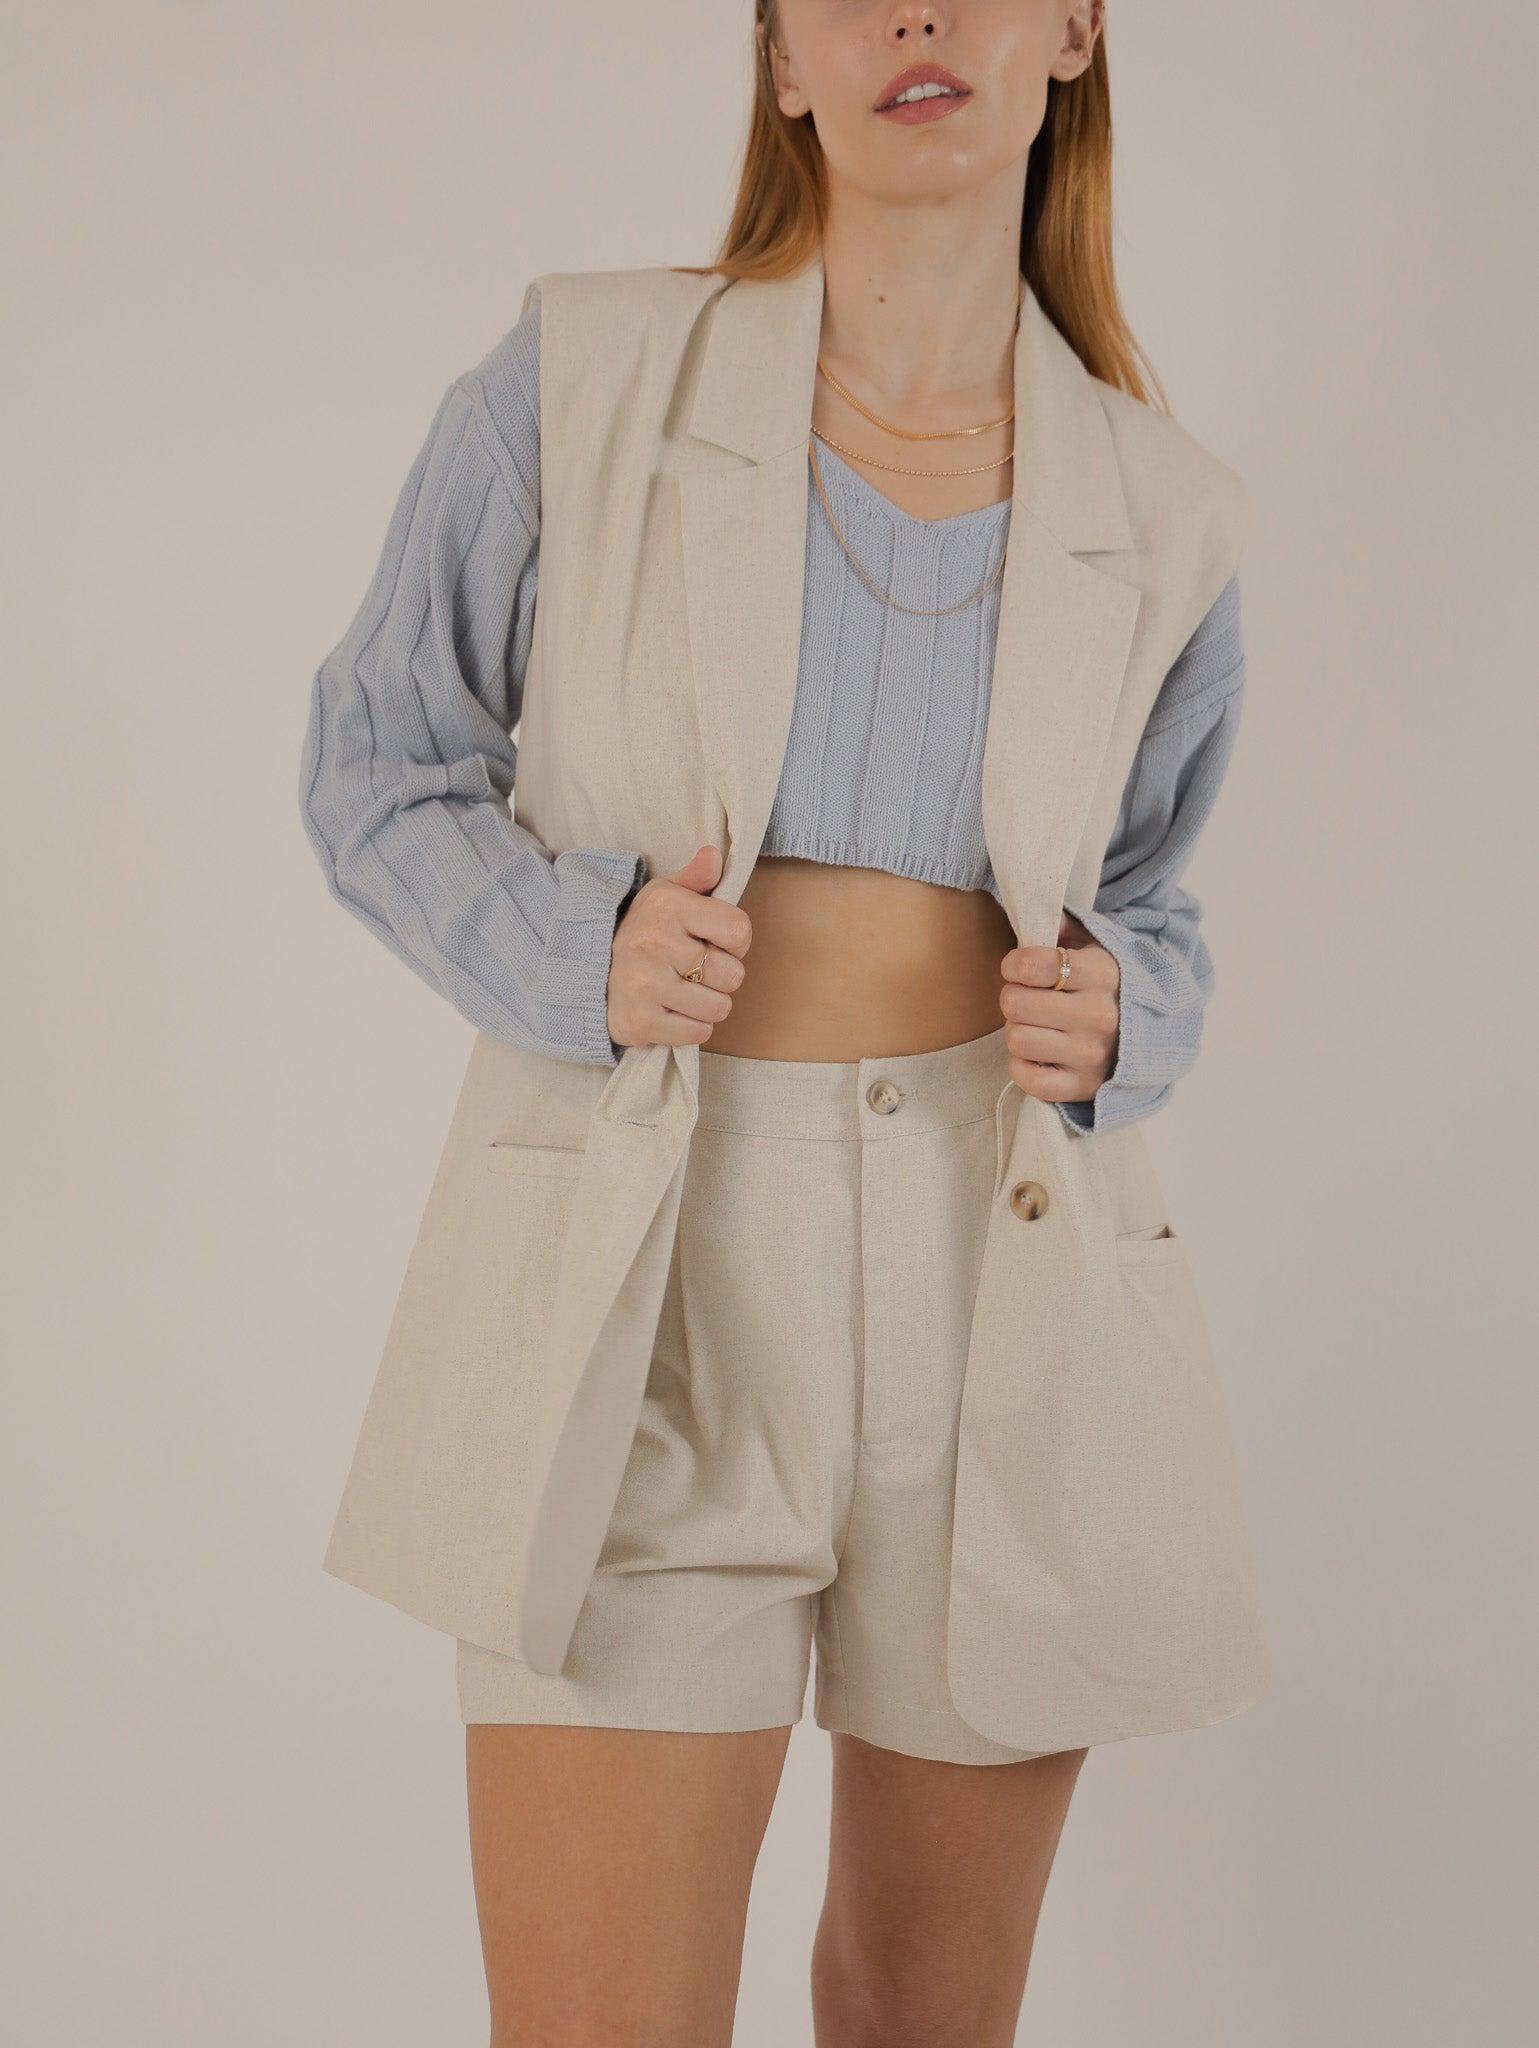 Molly Green - Lily Linen Vest - Outerwear